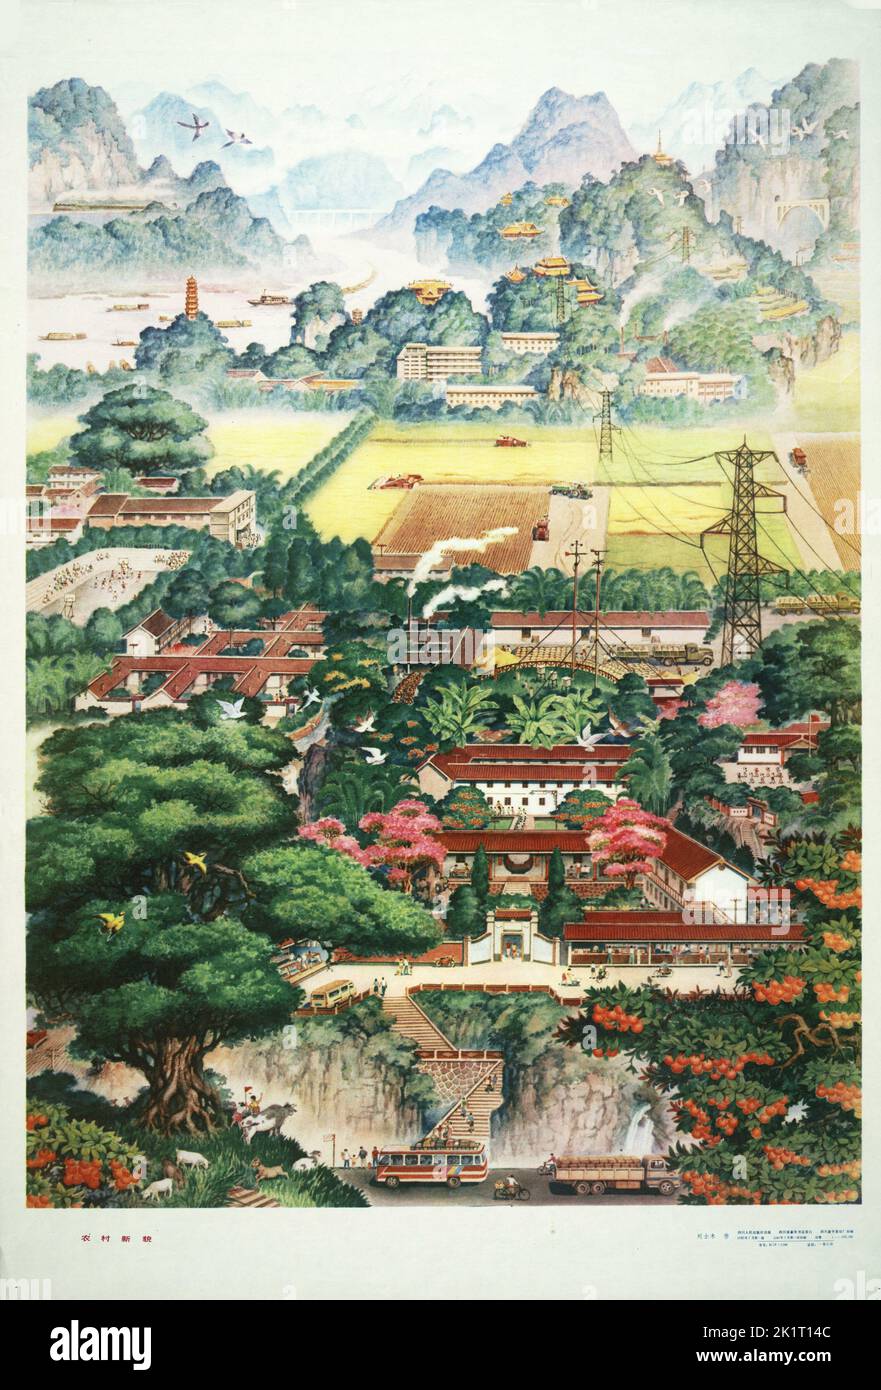 New face of the countryside. Museum: PRIVATE COLLECTION. Author: Liu Shimu. Stock Photo